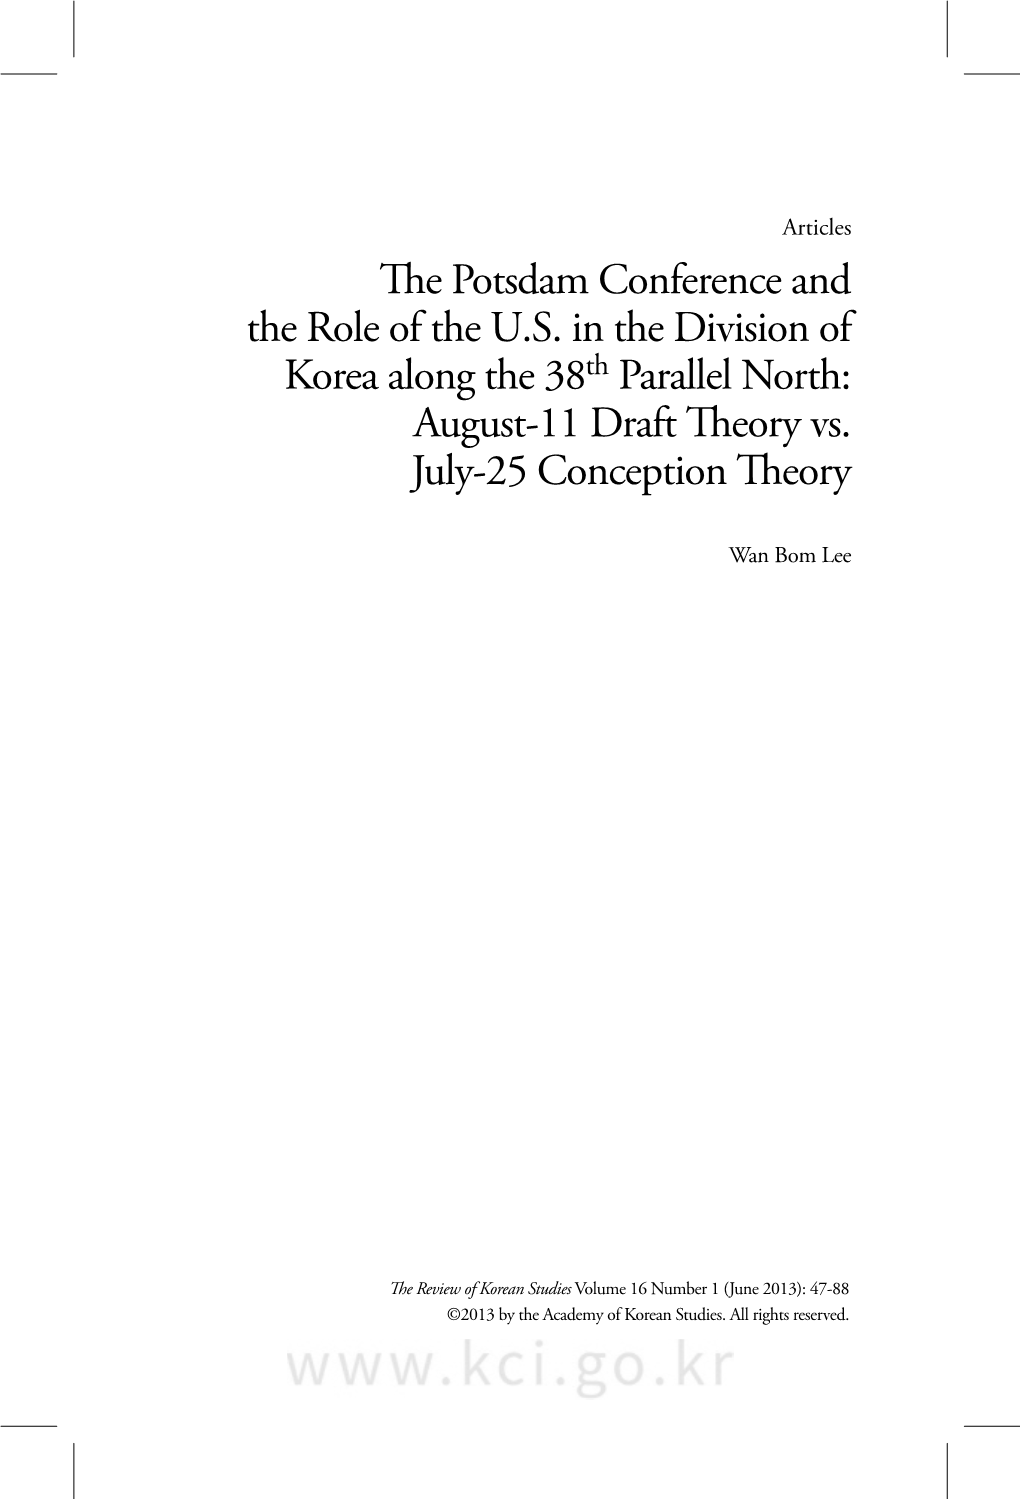 The Potsdam Conference and the Role of the U.S. in the Division of Korea Along the 38Th Parallel North: August-11 Draft Theory Vs